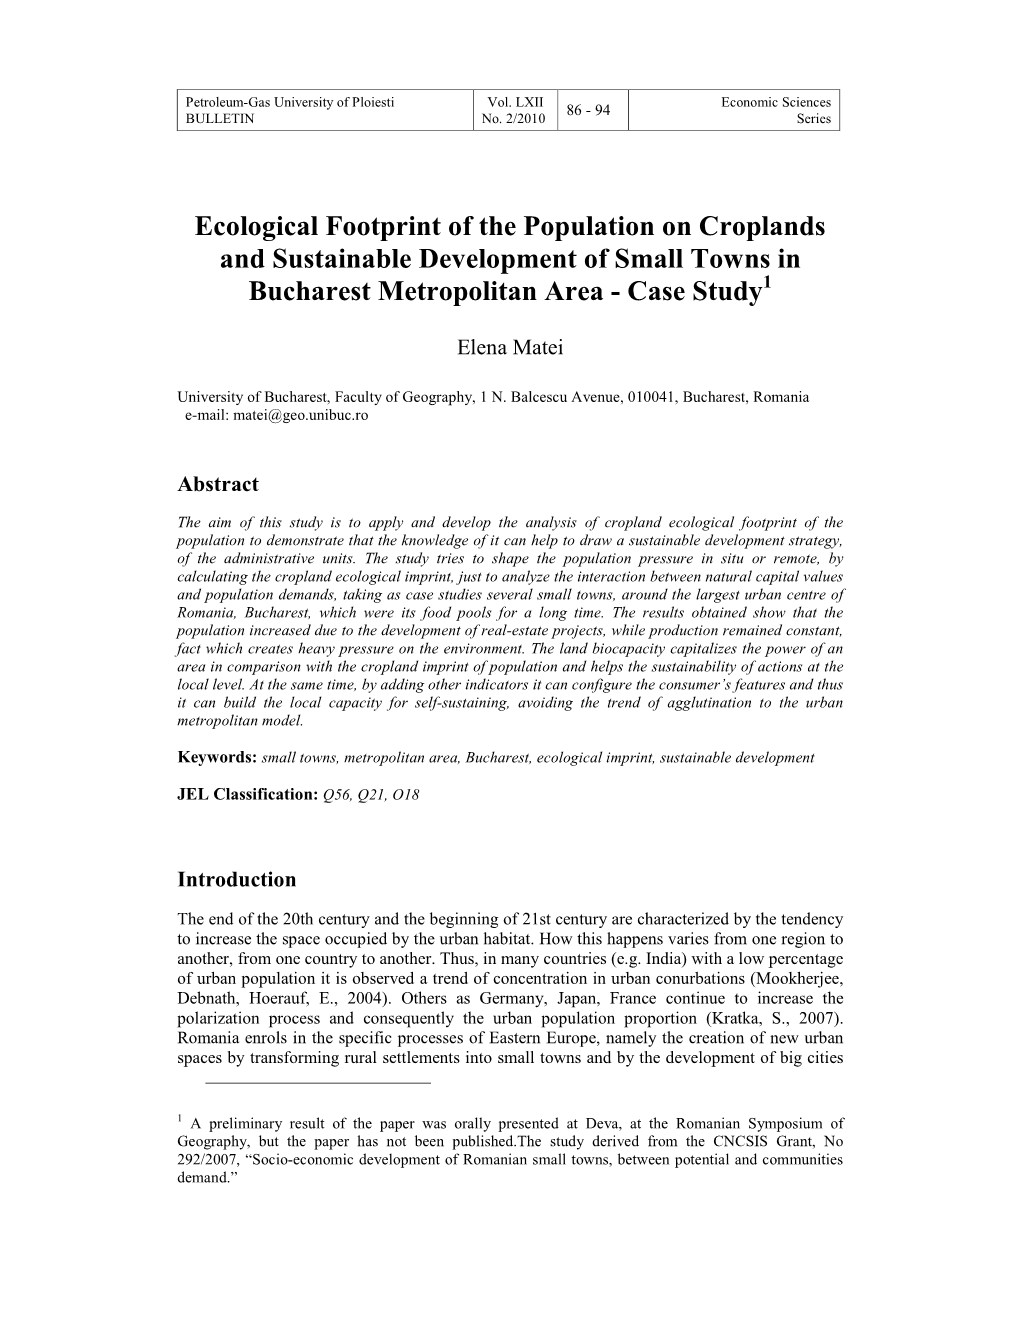 Ecological Footprint of the Population on Croplands and Sustainable Development of Small Towns in Bucharest Metropolitan Area - Case Study 1